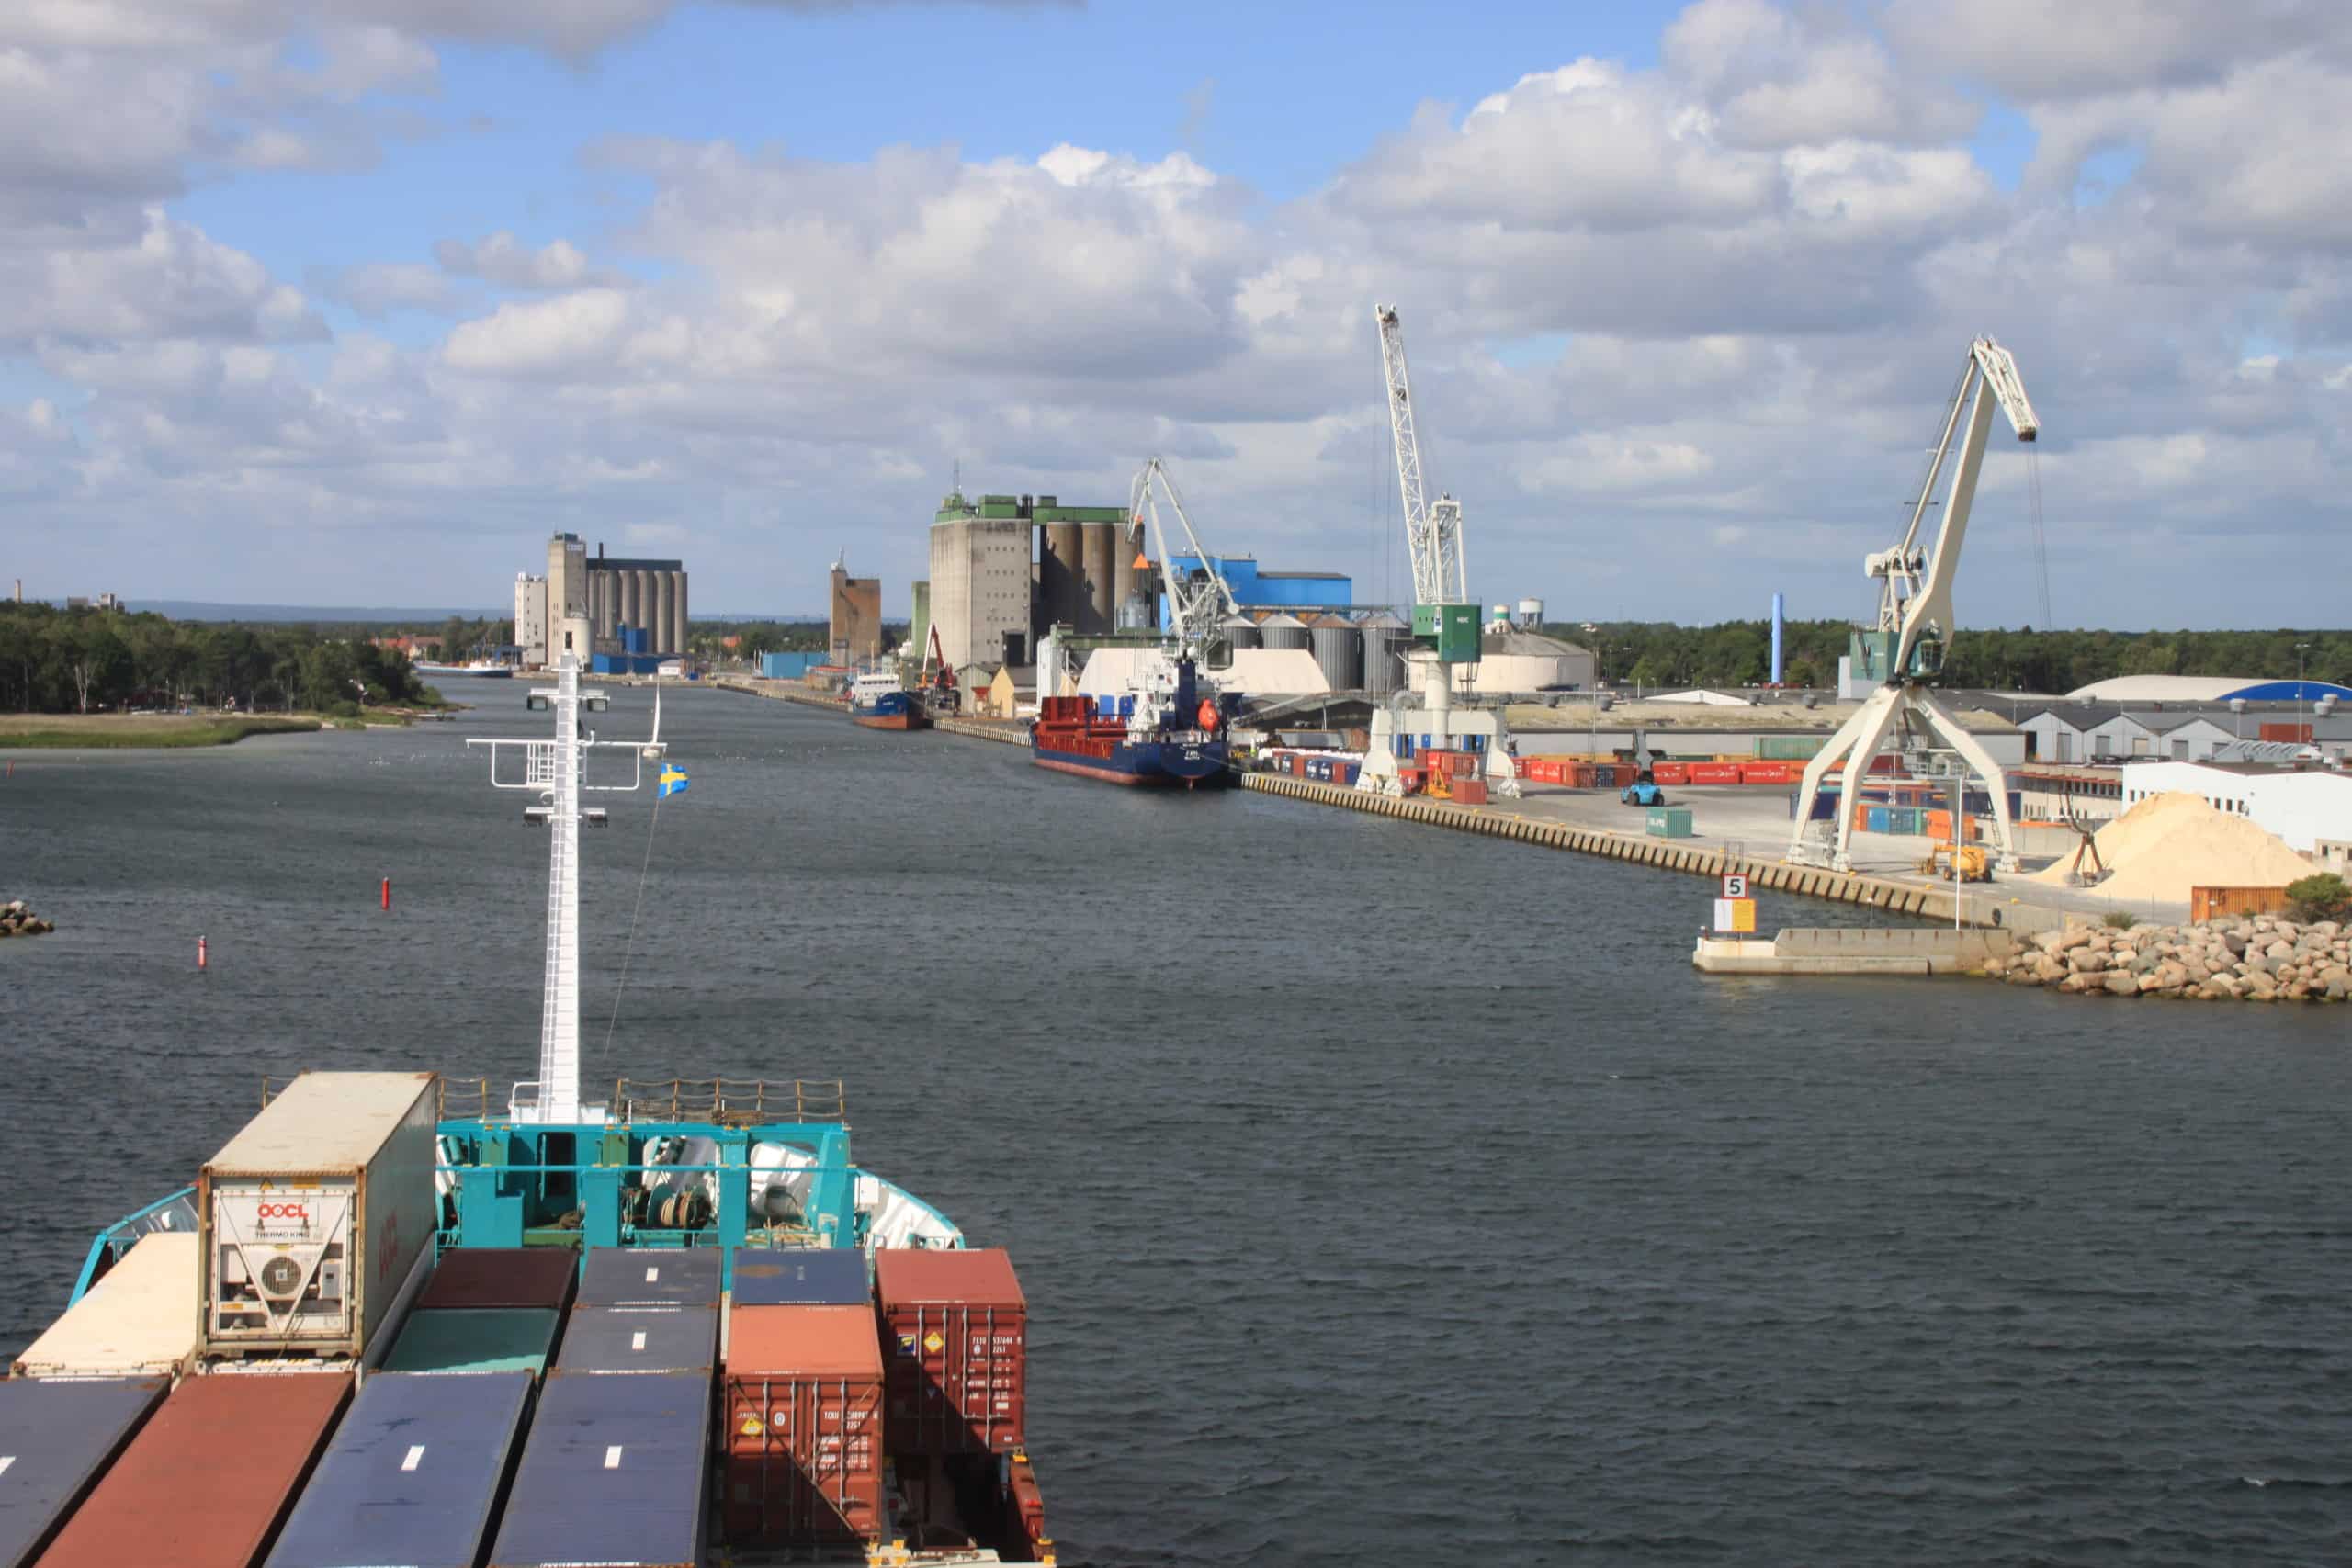 Ahus shipping port in Sweden.